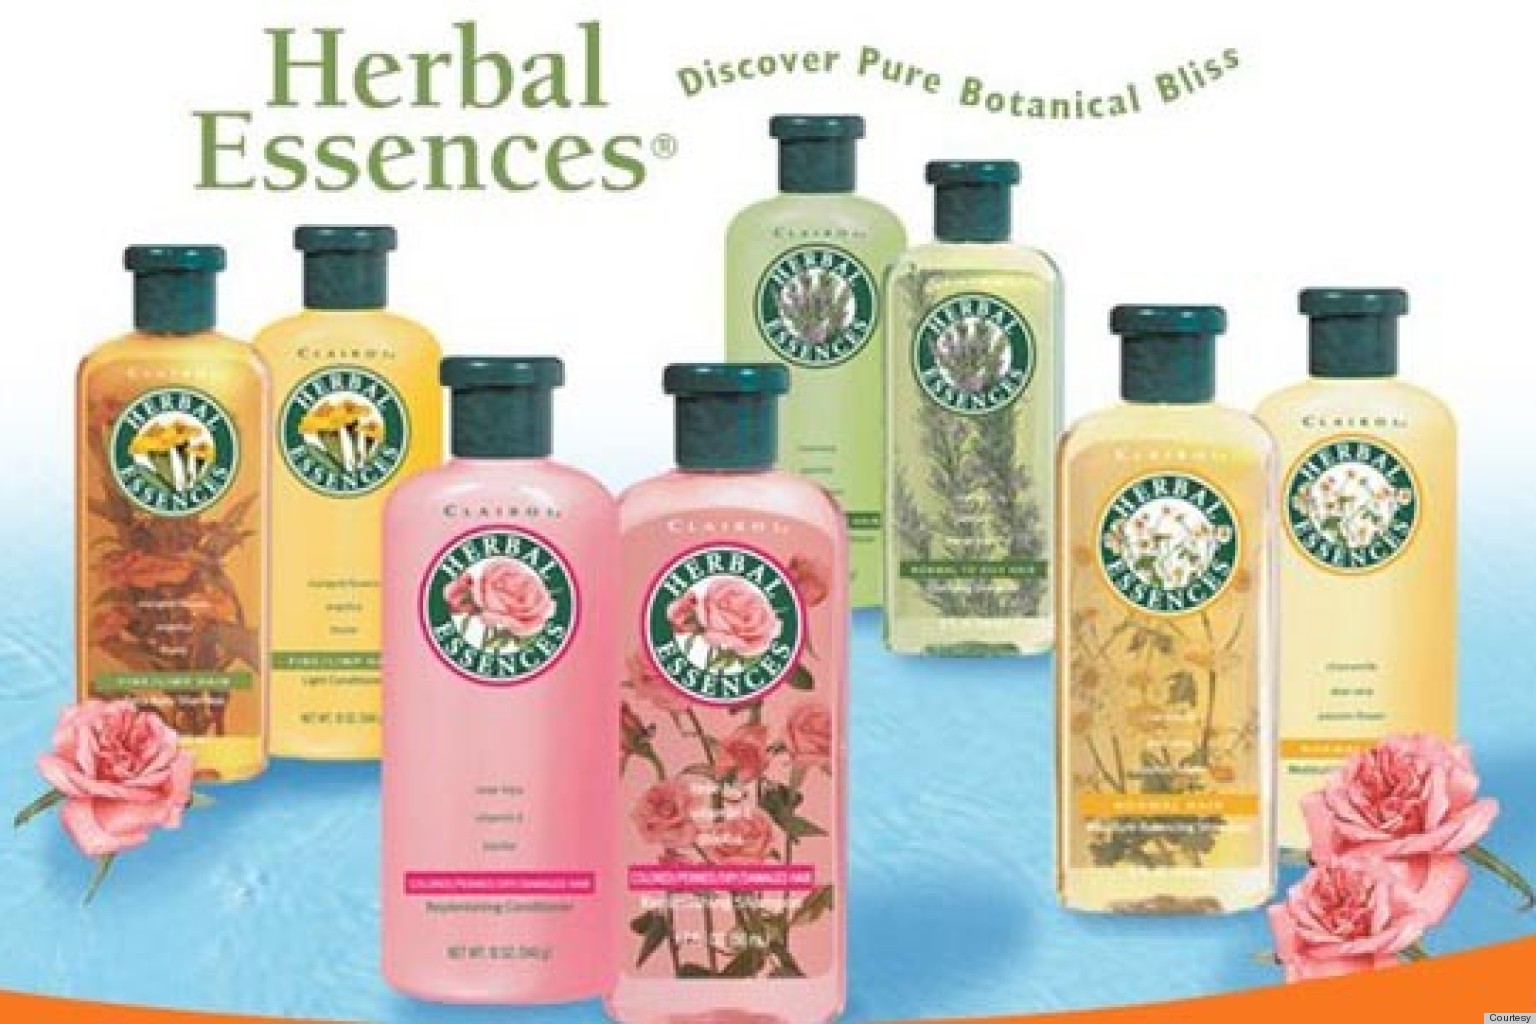 Herbal Essences To Reintroduce Old Bottles Scents In 2013 Photos